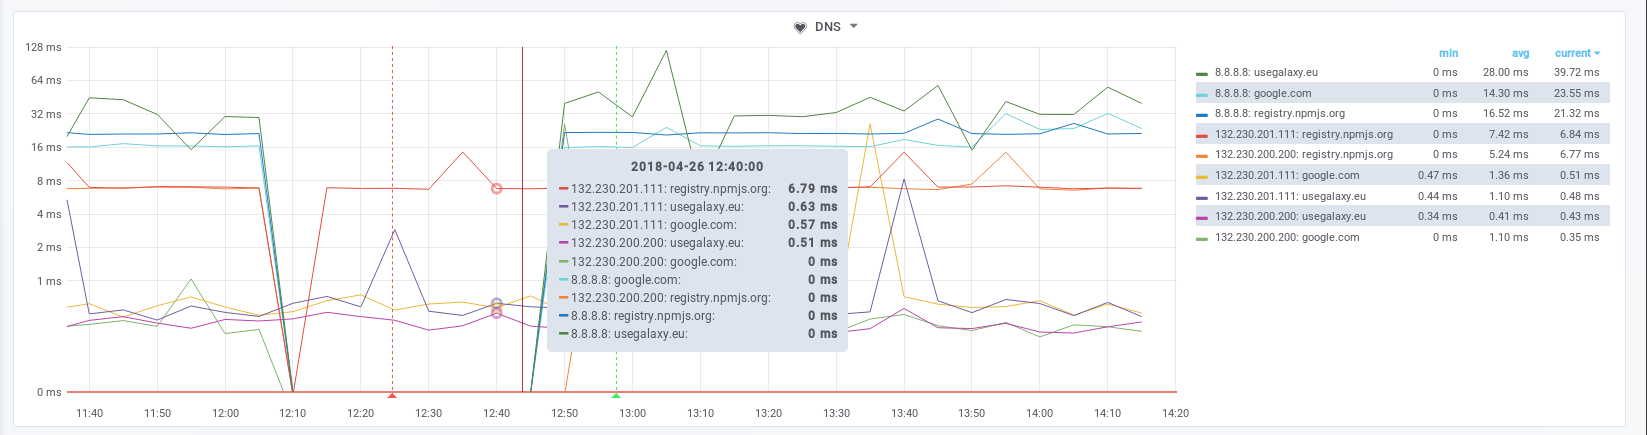 DNS providers failing to respond to requests.